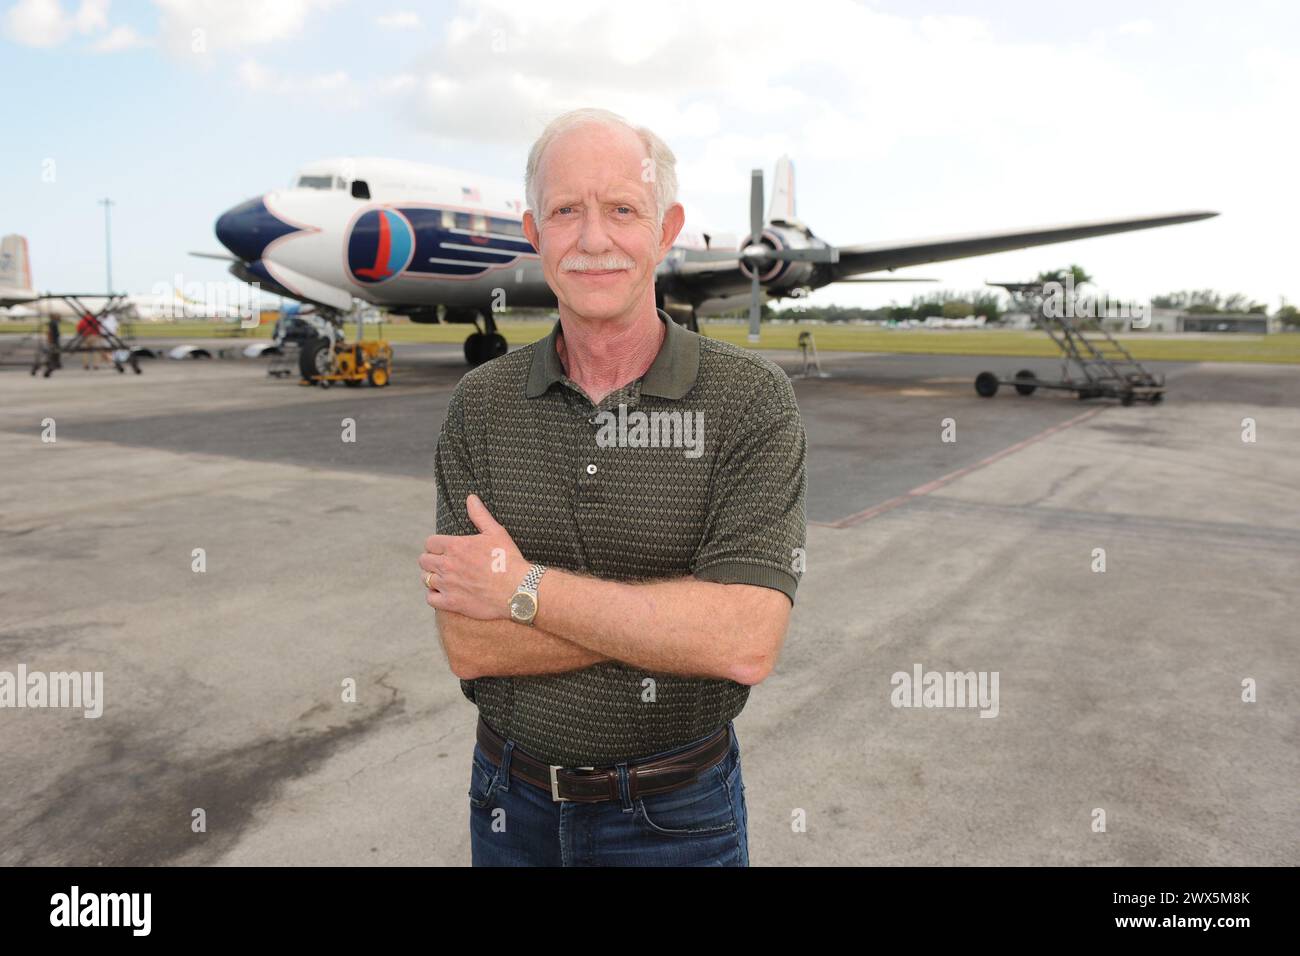 MIAMI, FL - NOVEMBER 17: Captain 'Sully' Sullenberger and Co-pilot Jeff Skiles pose with the Historical 1958 DC7 for a benefit hosted by Historical Flight Foundation. Chesley Burnett 'Sully' Sullenberger, III (born January 23, 1951) is a retired airline captain and aviation safety consultant. He was hailed as a national hero in the United States when he successfully executed an emergency water landing of US Airways Flight 1549 in the Hudson River off Manhattan, New York City, after the aircraft was disabled by striking a flock of Canada geese during its initial climb out of LaGuardia Airport o Stock Photo